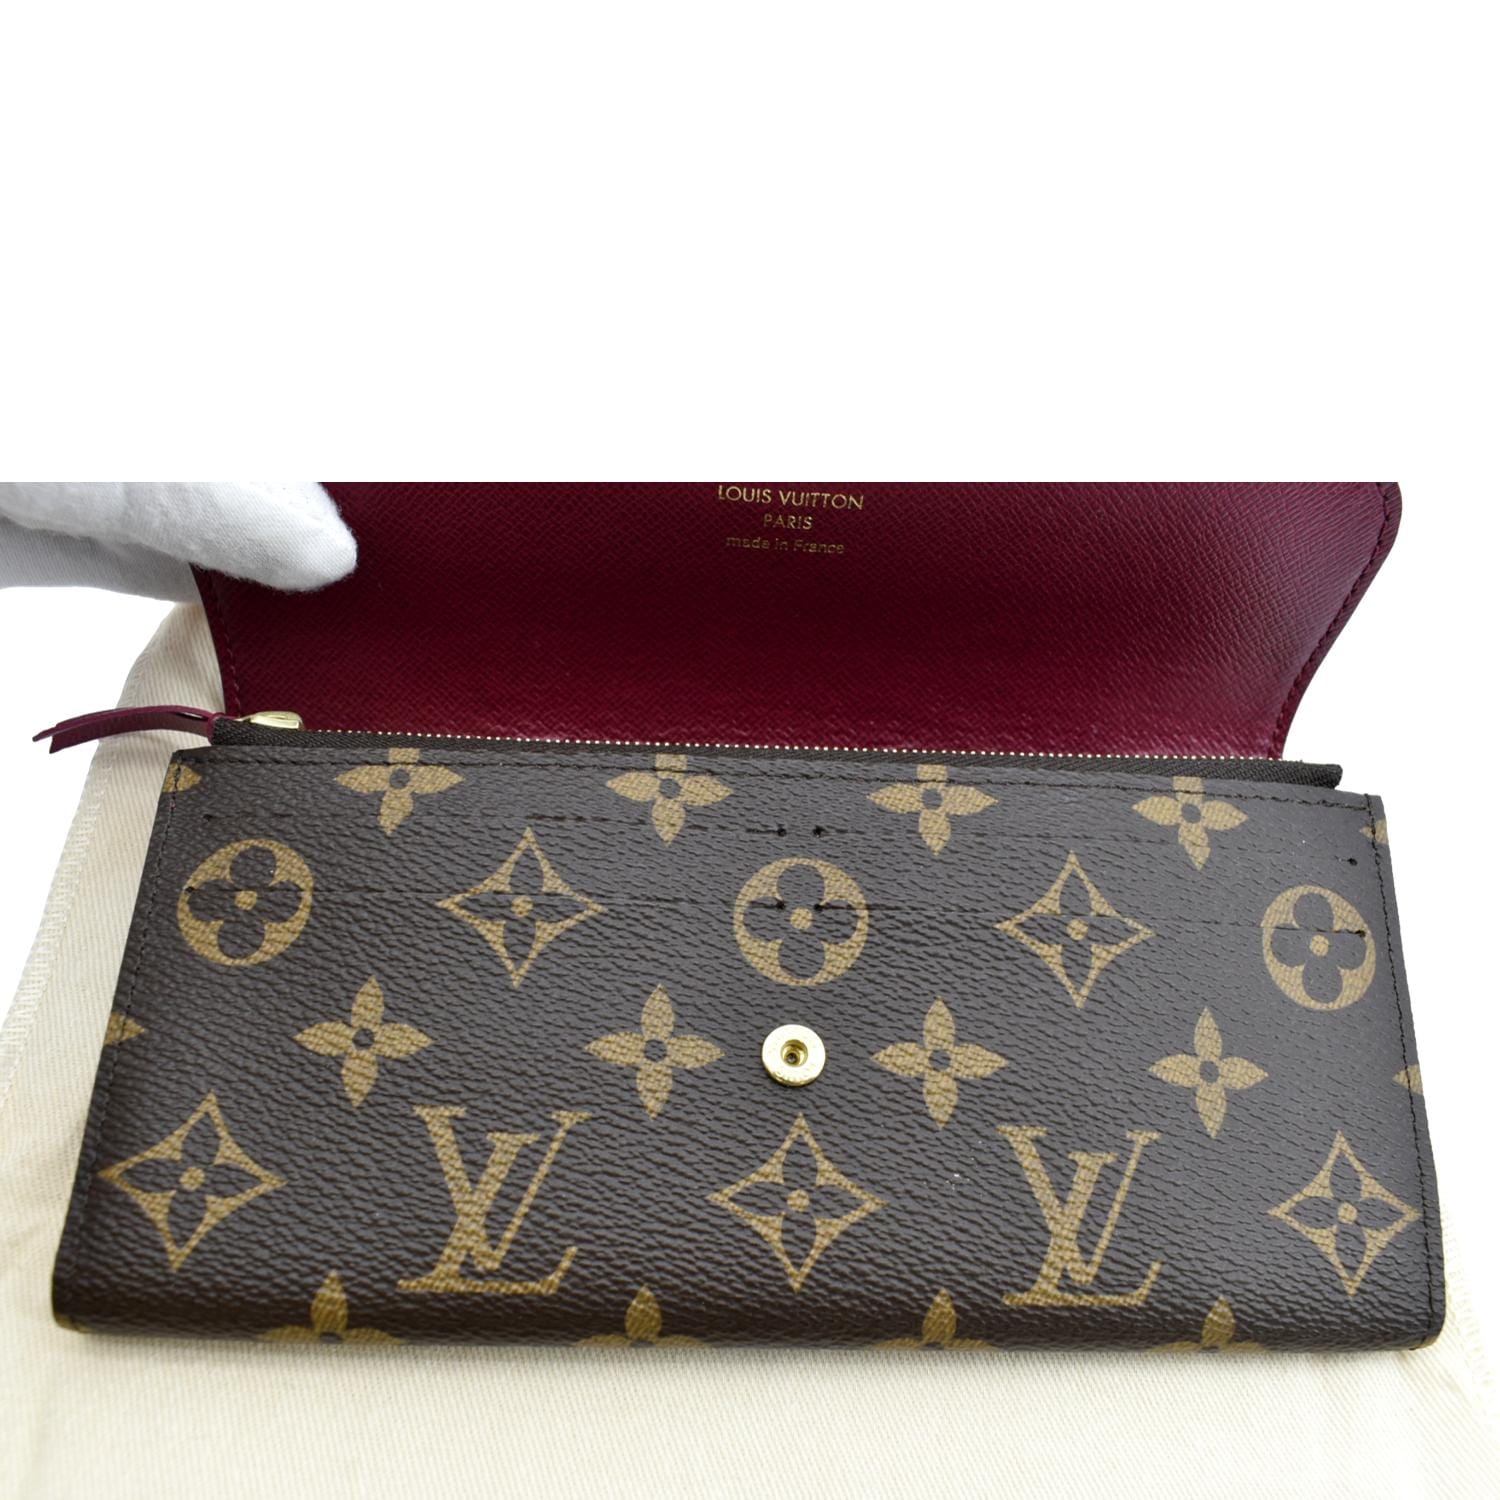 NWT Louis Vuitton Emilie Wallet, Monogram and Light Pink Coated Canvas